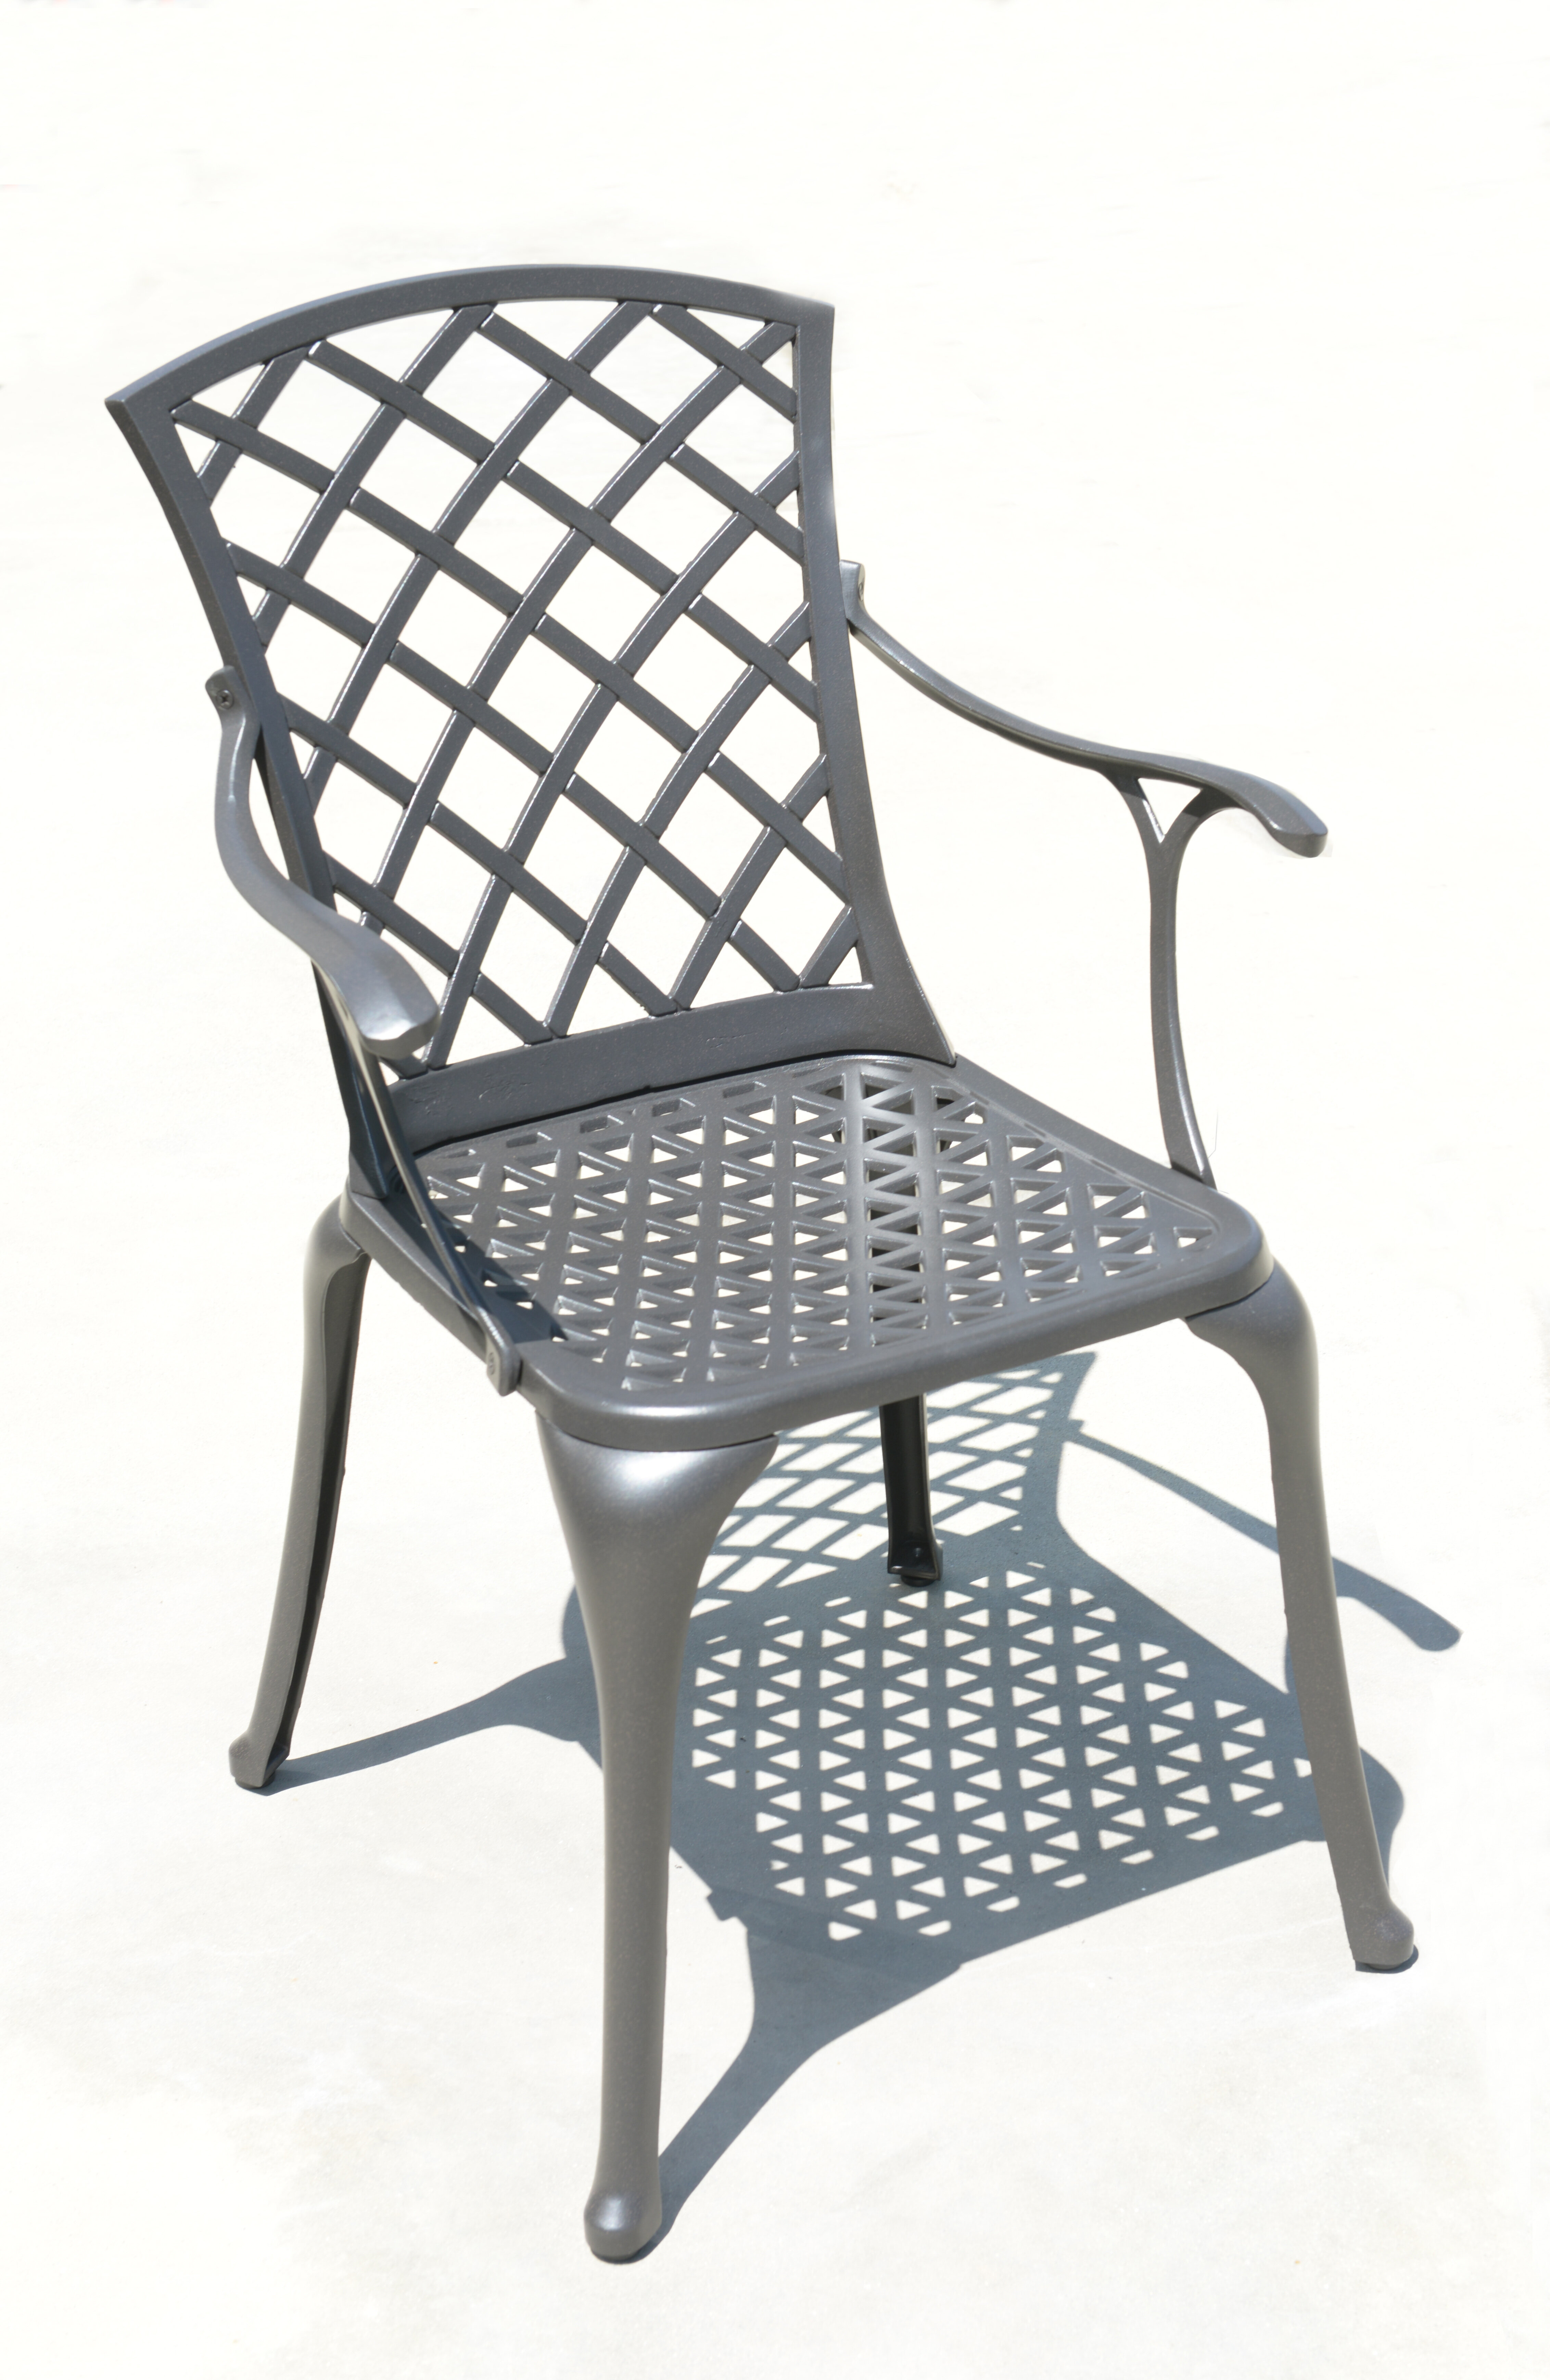 Dhc Furniture Memphis Stacking Patio Dining Chair Wayfair Ca